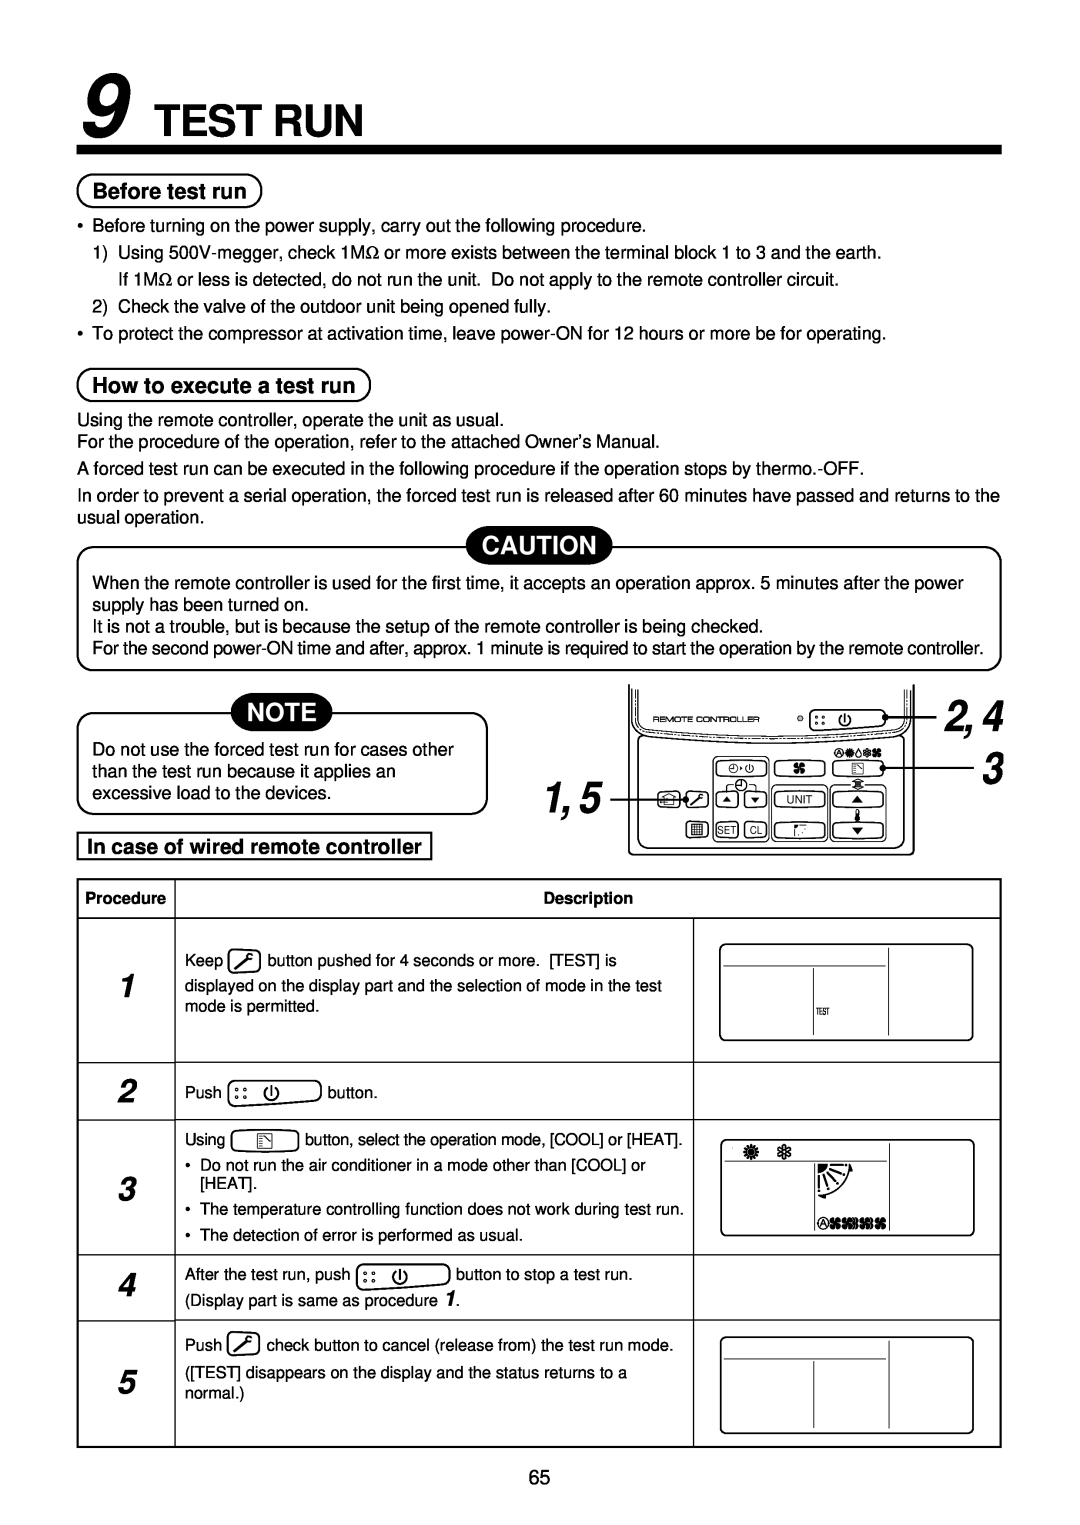 Toshiba R410A service manual Test Run, 2, 3, Before test run, How to execute a test run, In case of wired remote controller 